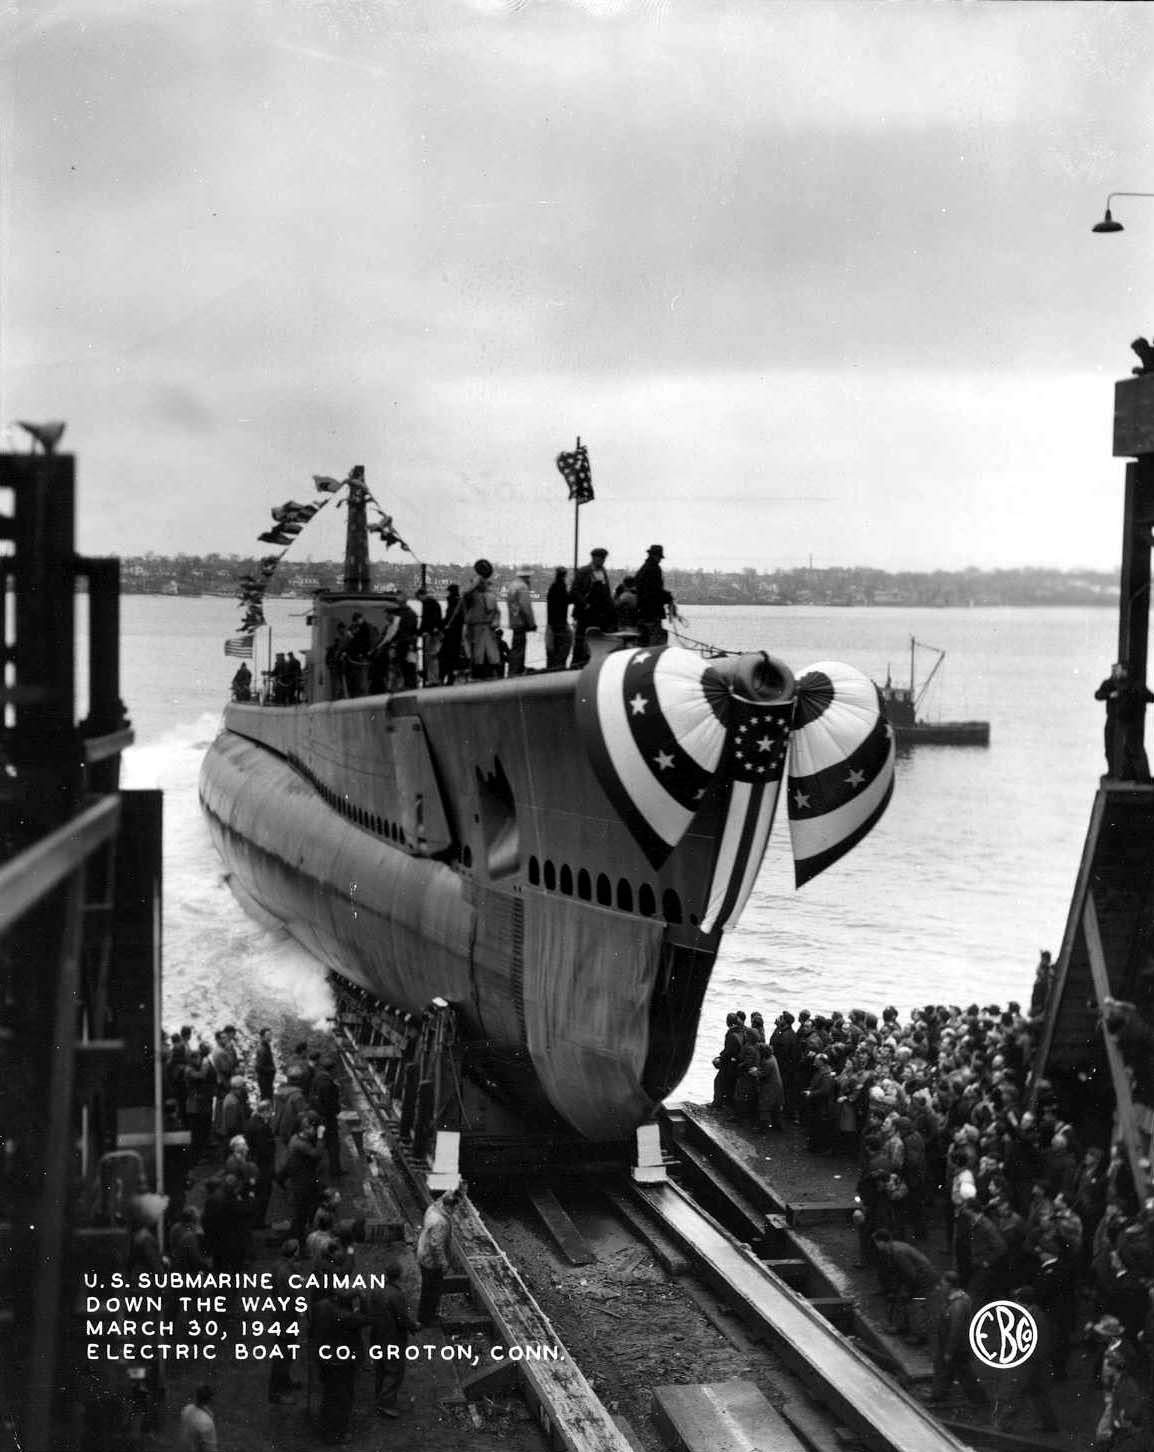 Launching of submarine Caiman, Electric Boat Company, Groton, Connecticut, United States, 30 Mar 1944